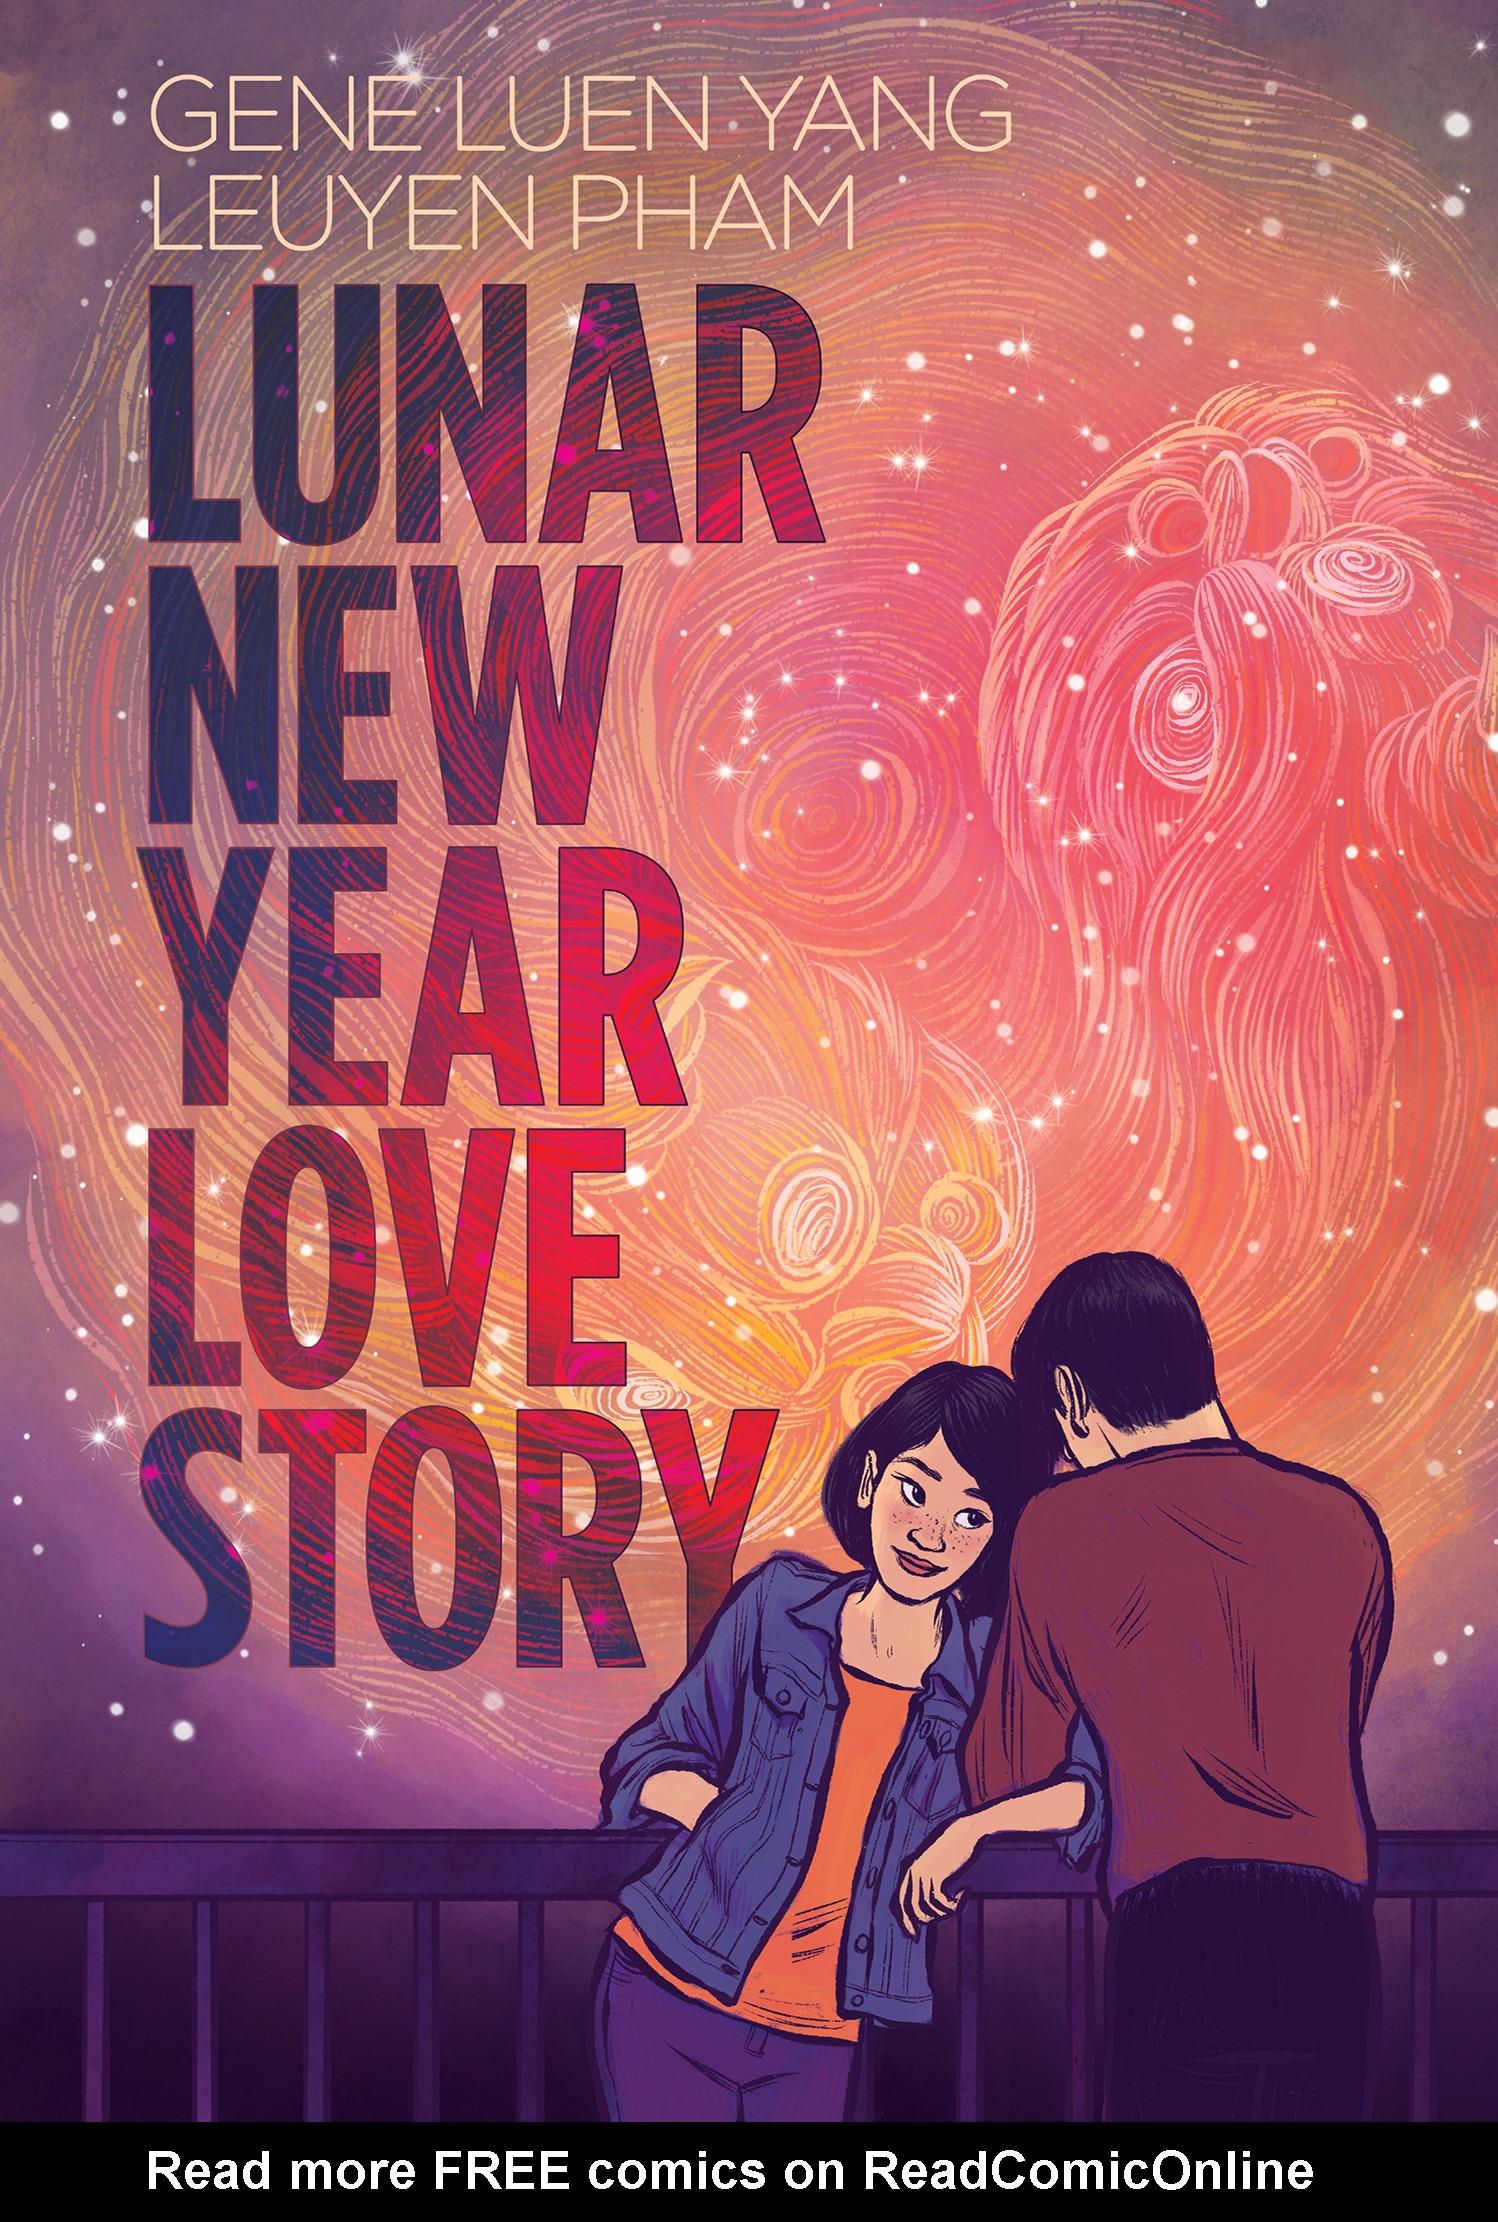 Read online Lunar New Year Love Story comic -  Issue # TPB (Part 1) - 1